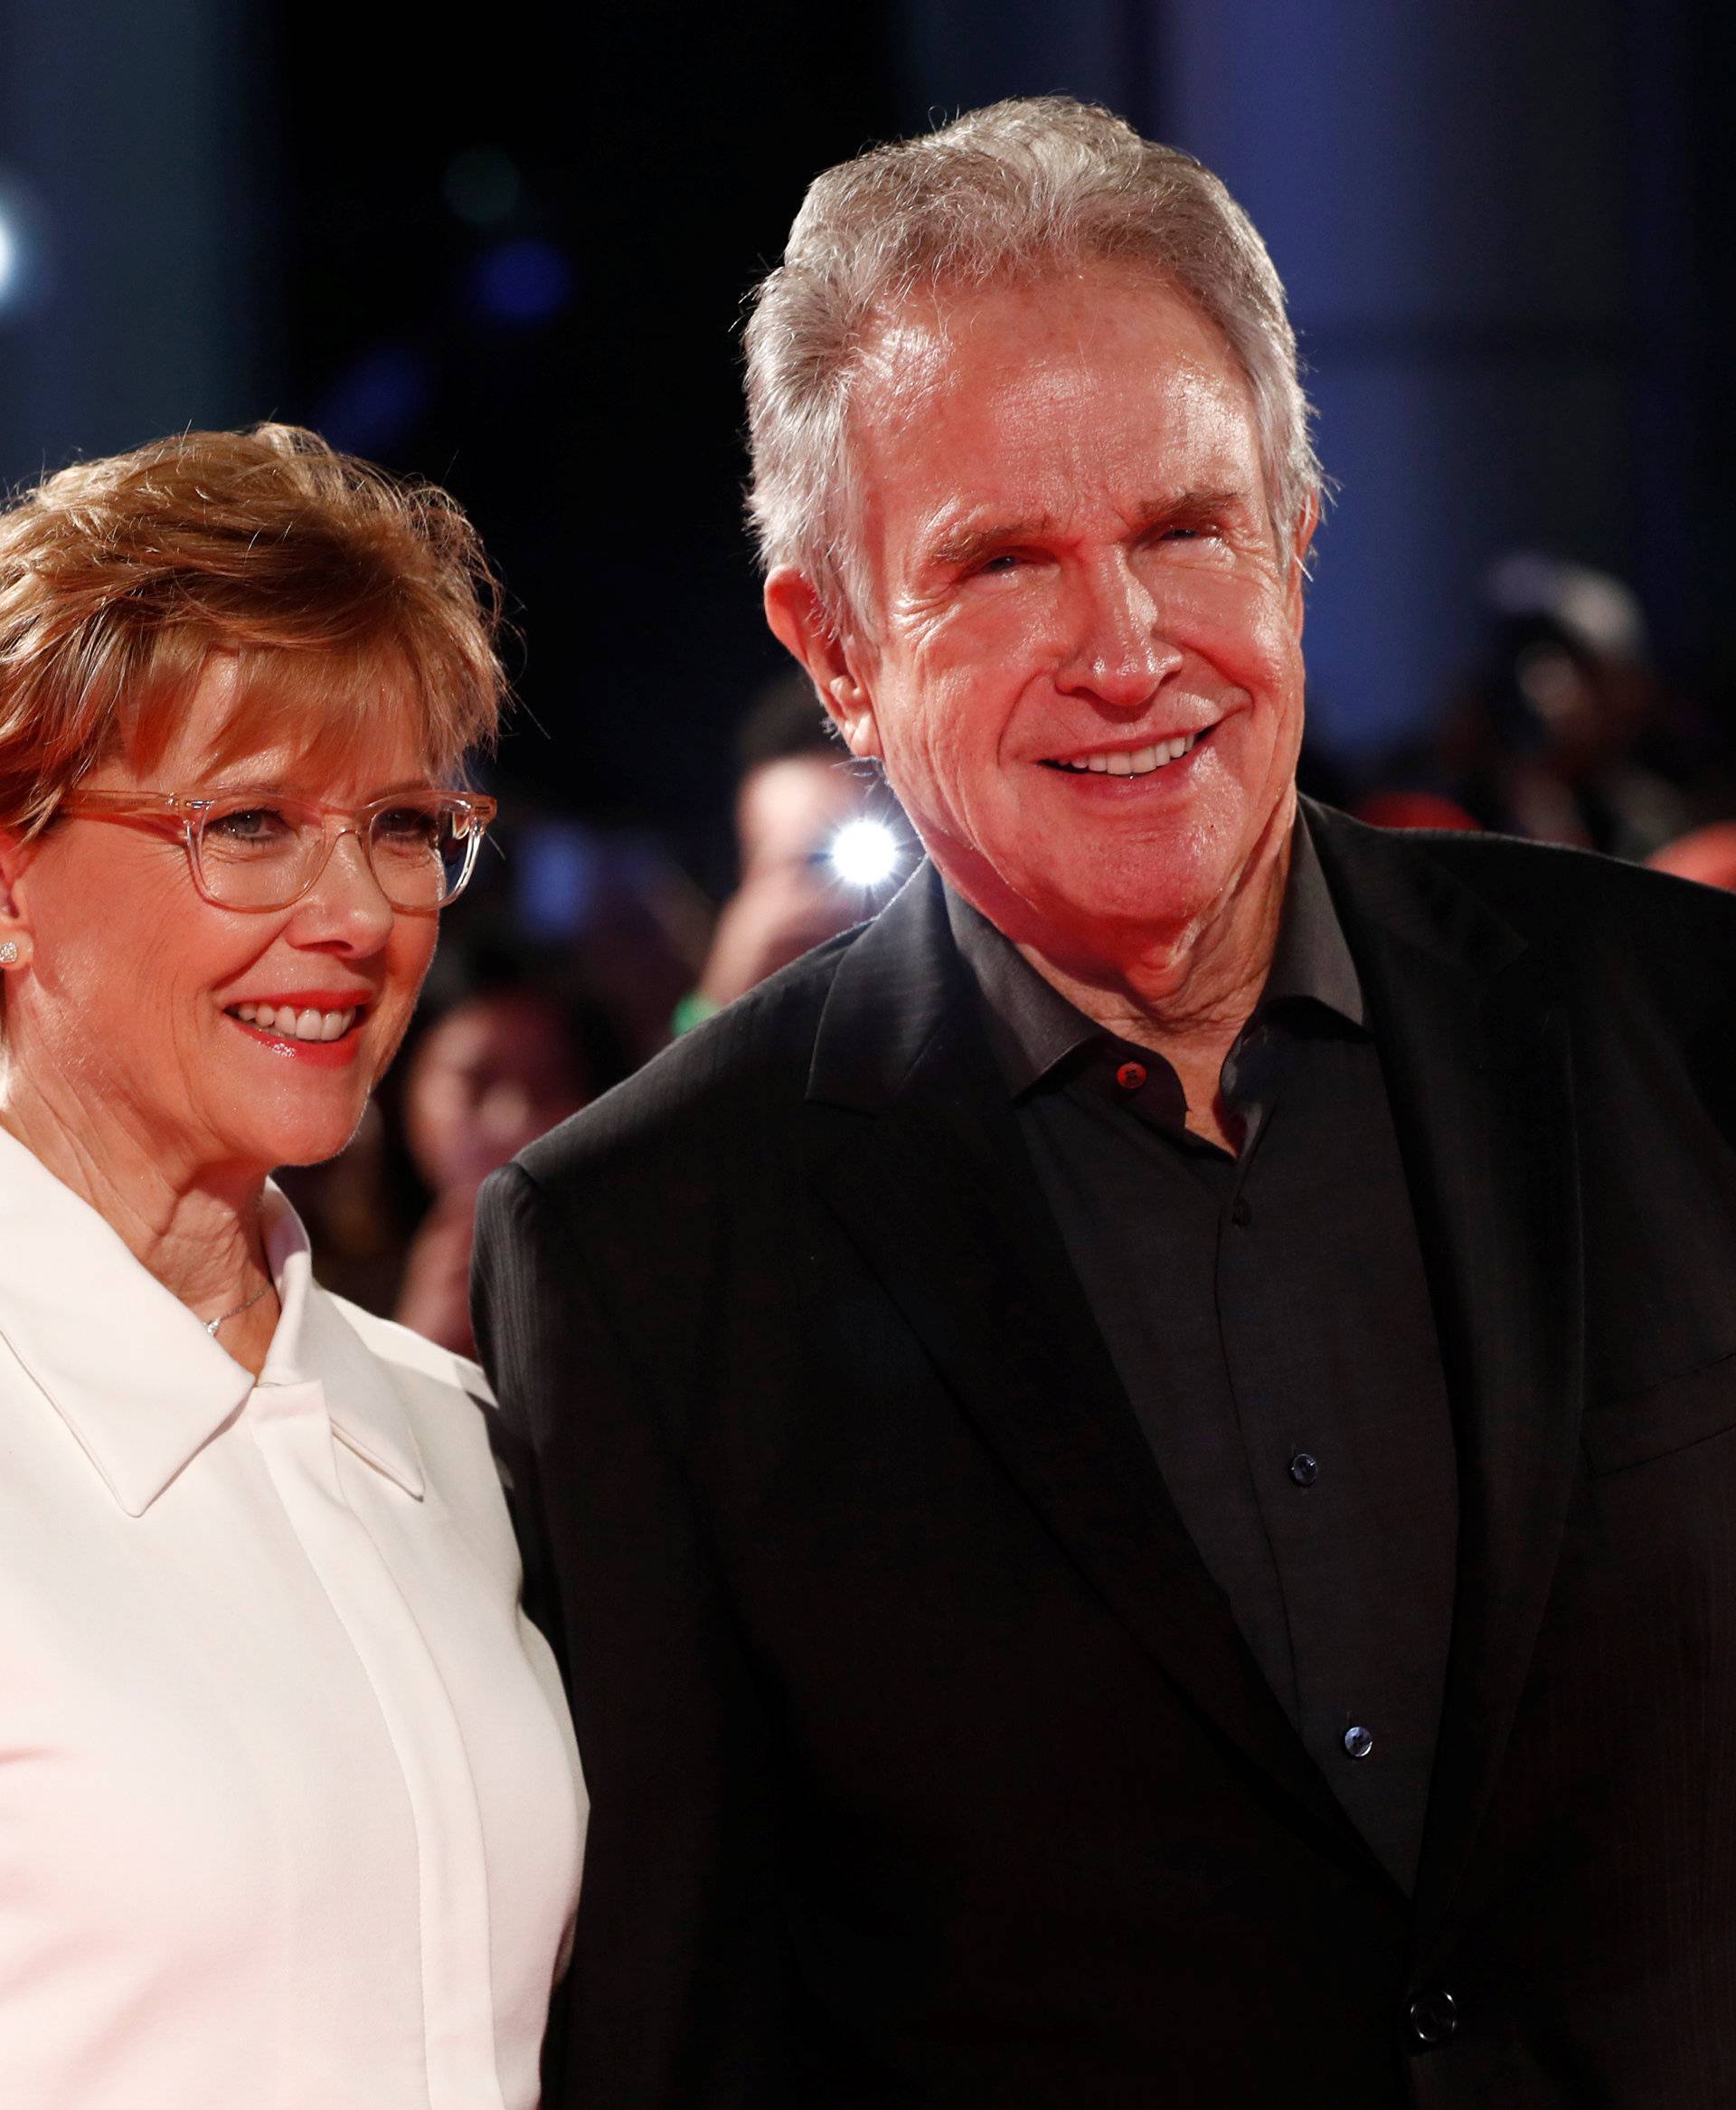 Bening arrives with her husband Beatty on the red carpet for the film "Film Stars Don't Die in Liverpool" during the Toronto International Film Festival in Toronto